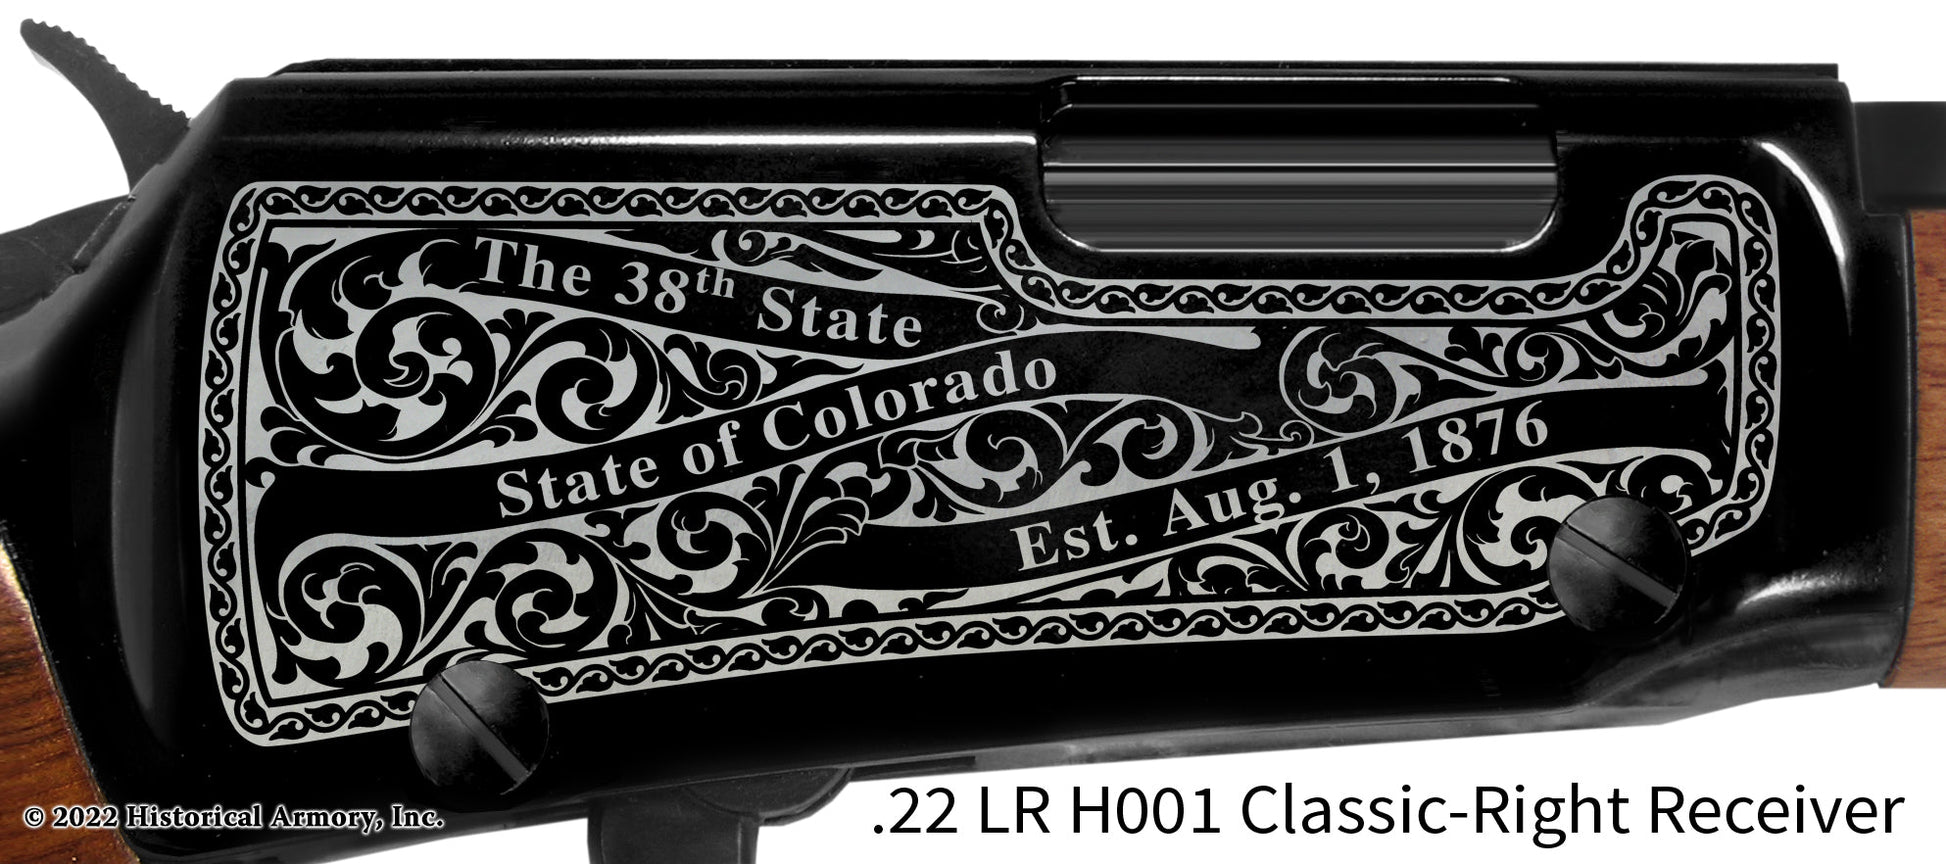 Garfield County Colorado Engraved Henry H001 Rifle